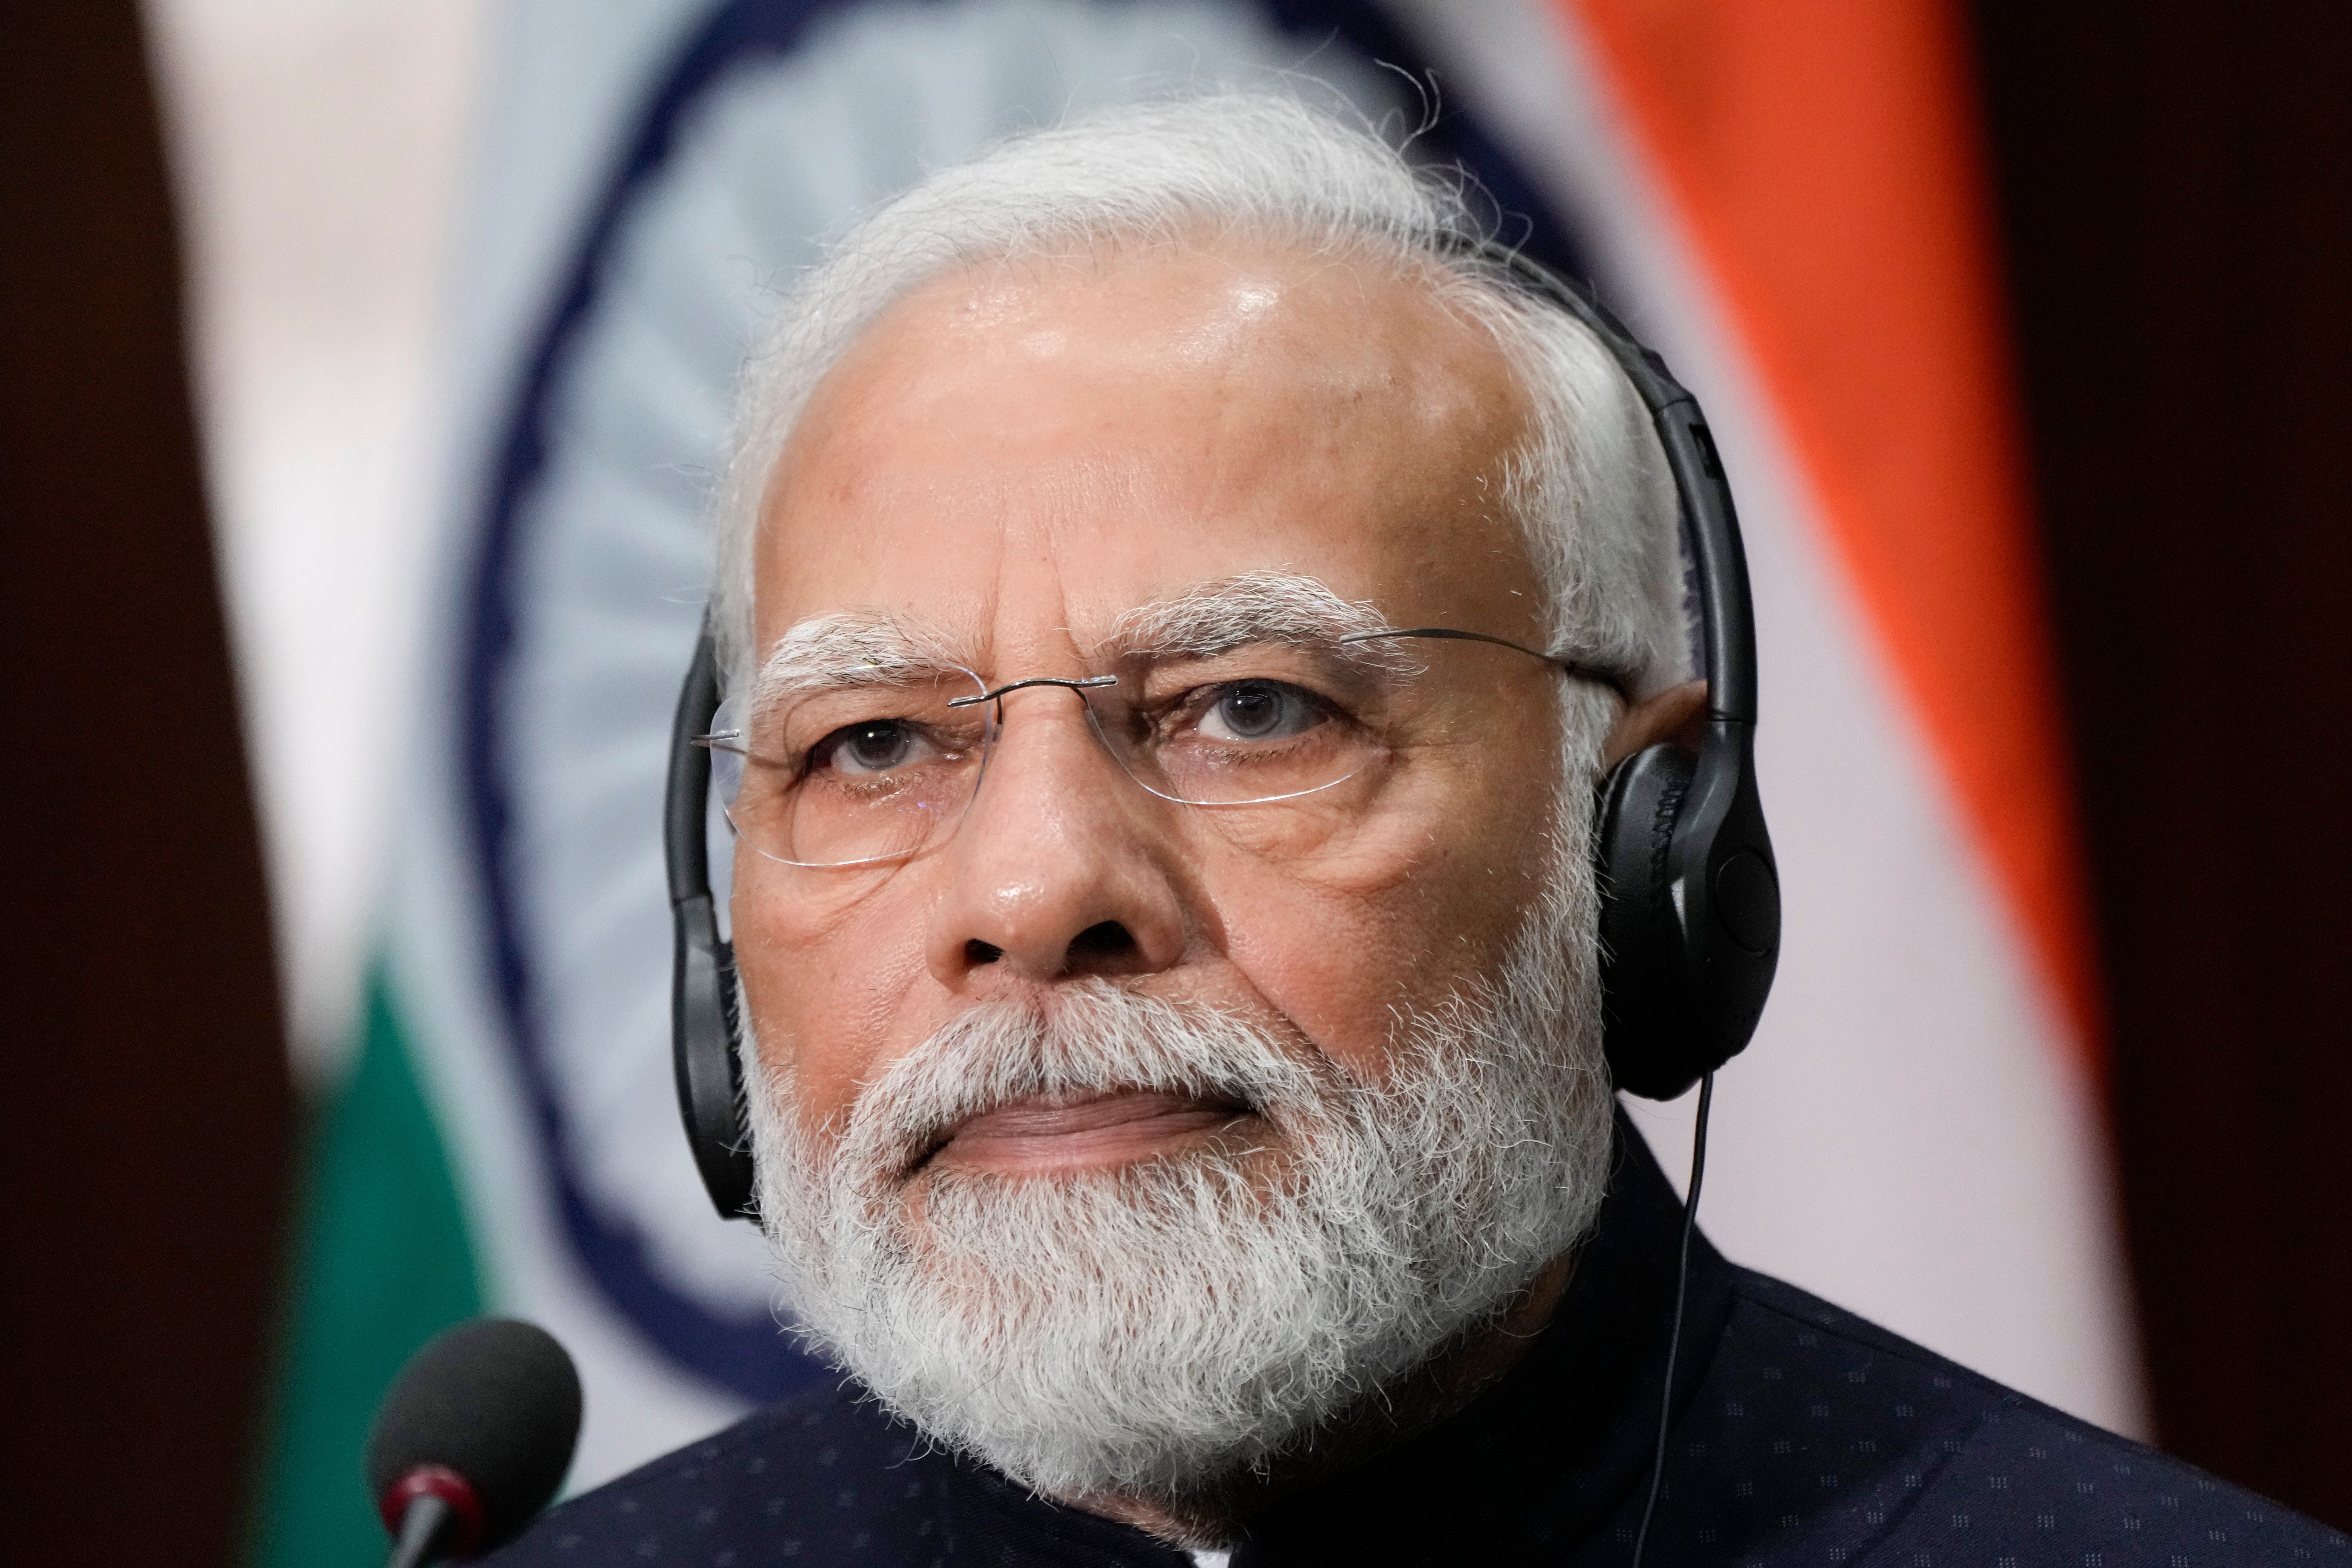 India's Prime Minister Narendra Modi listens as he visits the National Science Foundation in Alexandria